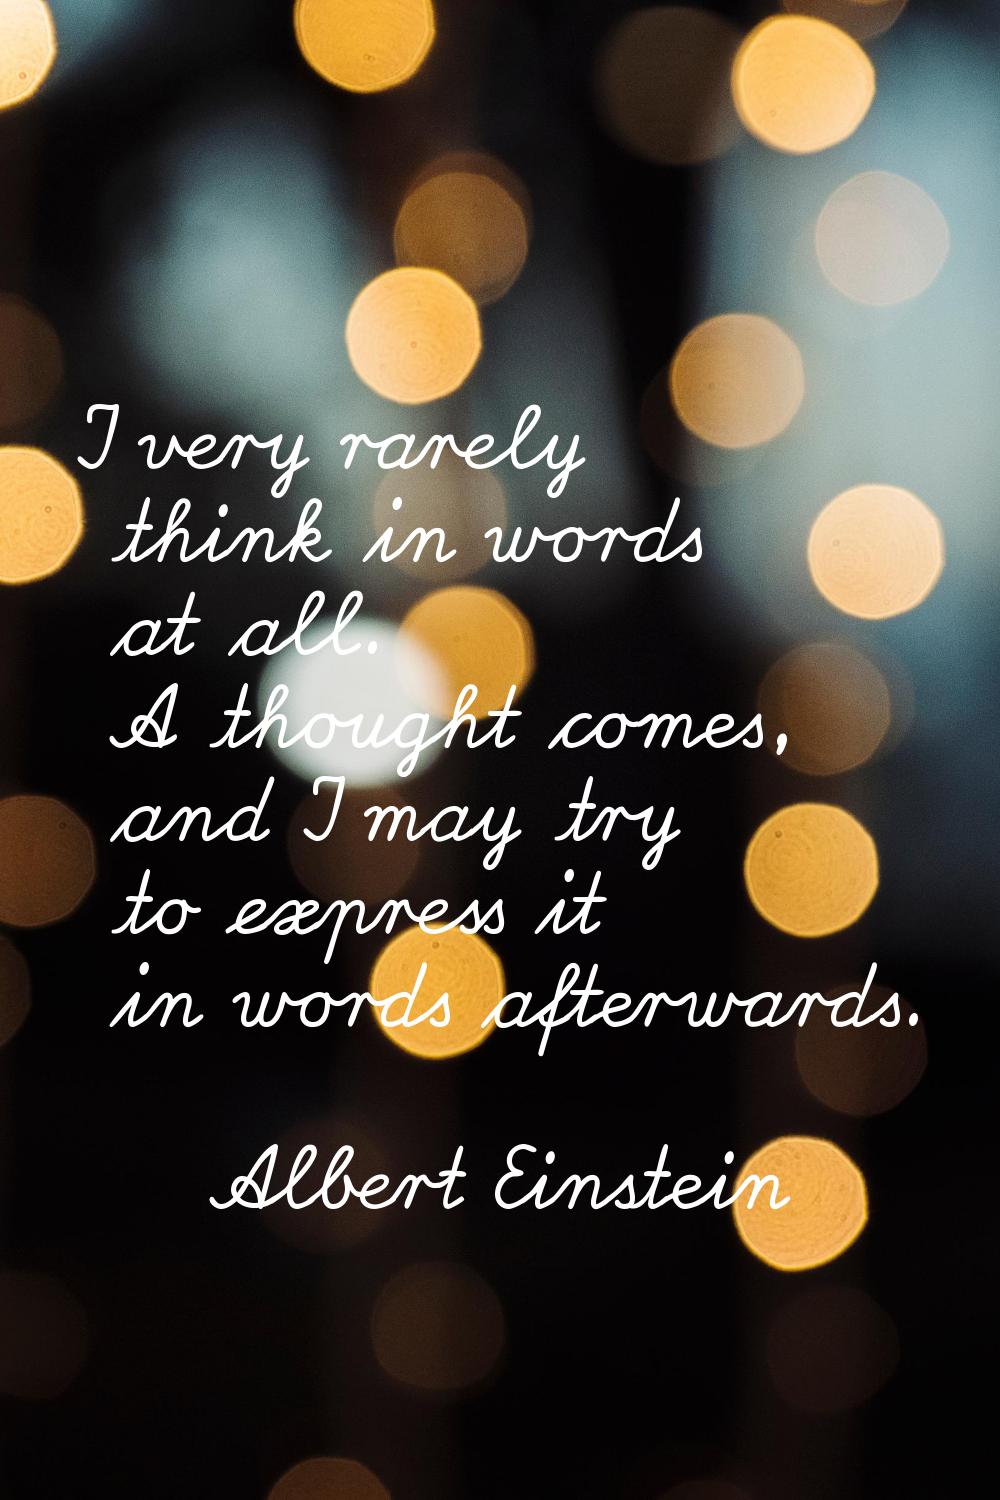 I very rarely think in words at all. A thought comes, and I may try to express it in words afterwar